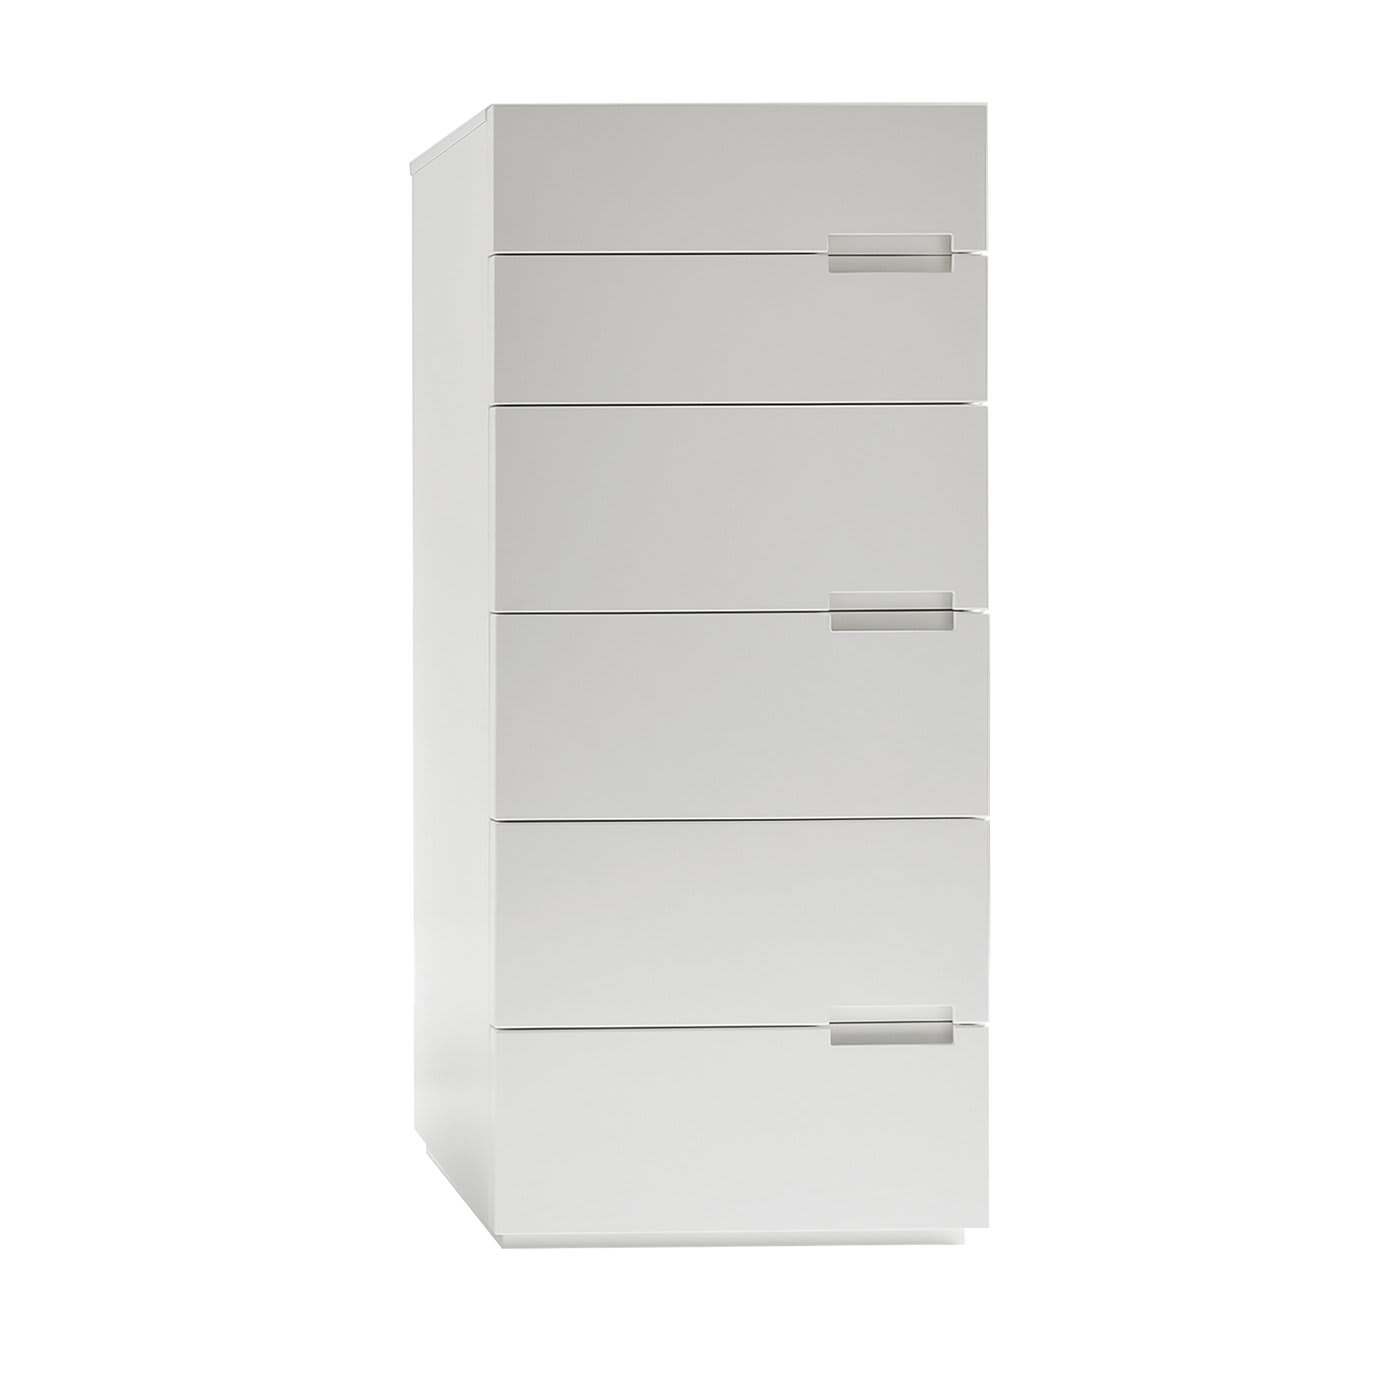 Asola White Chest of Drawers - Dall'Agnese